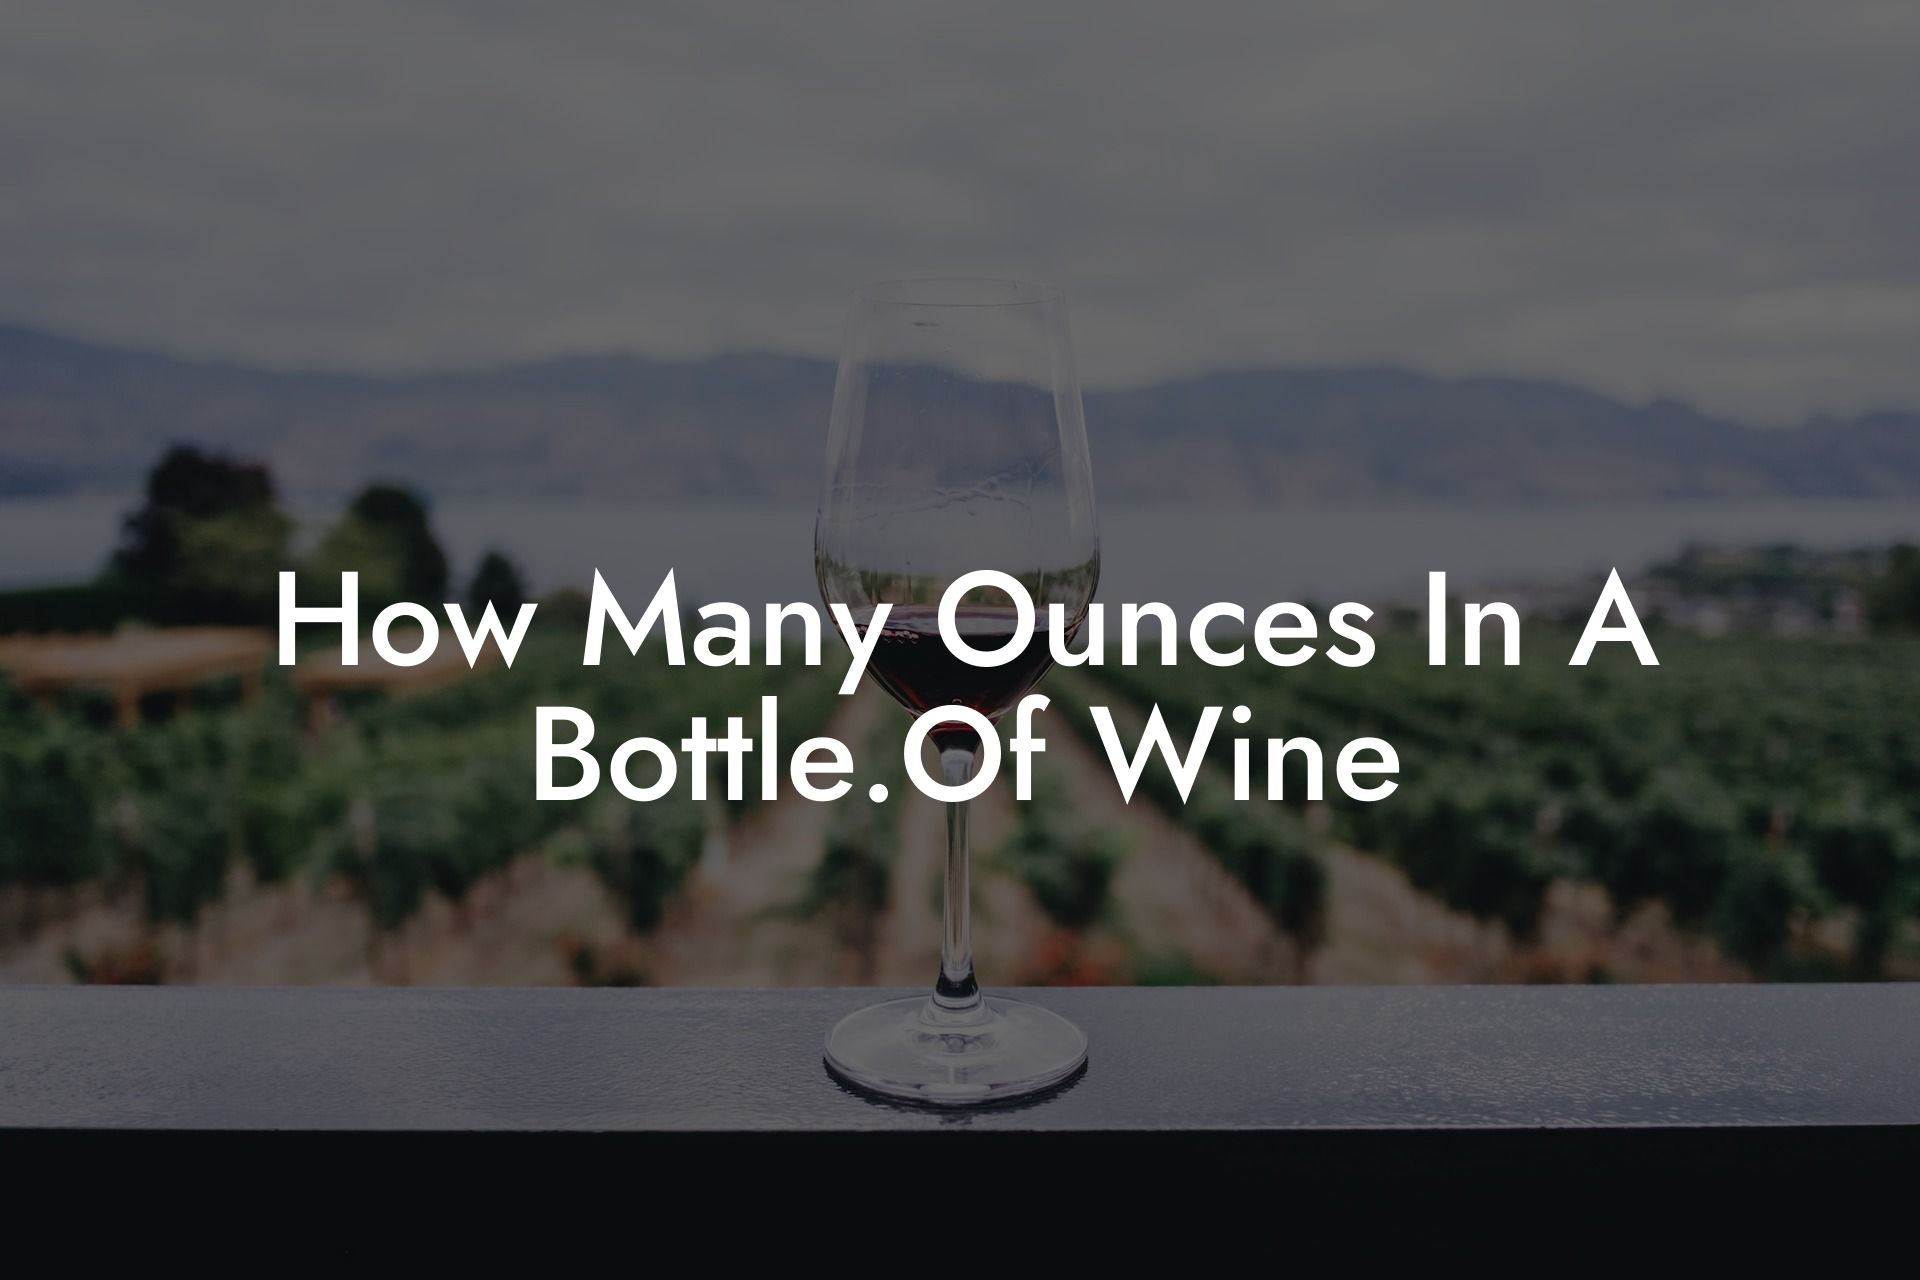 How Many Ounces In A Bottle.Of Wine